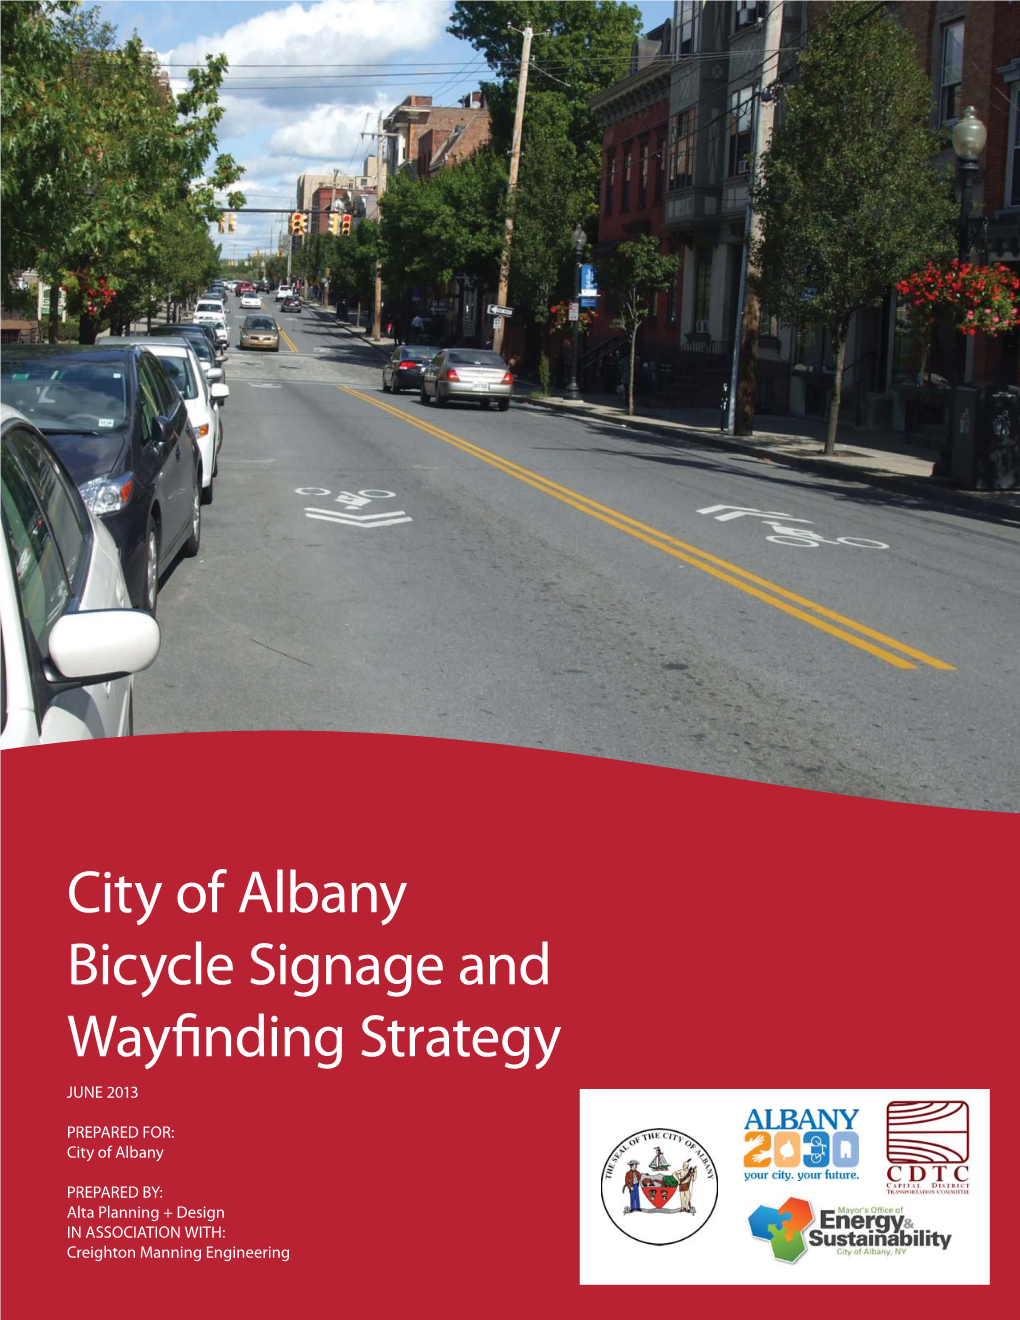 City of Albany Bicycle Signage and Wayfinding Strategy